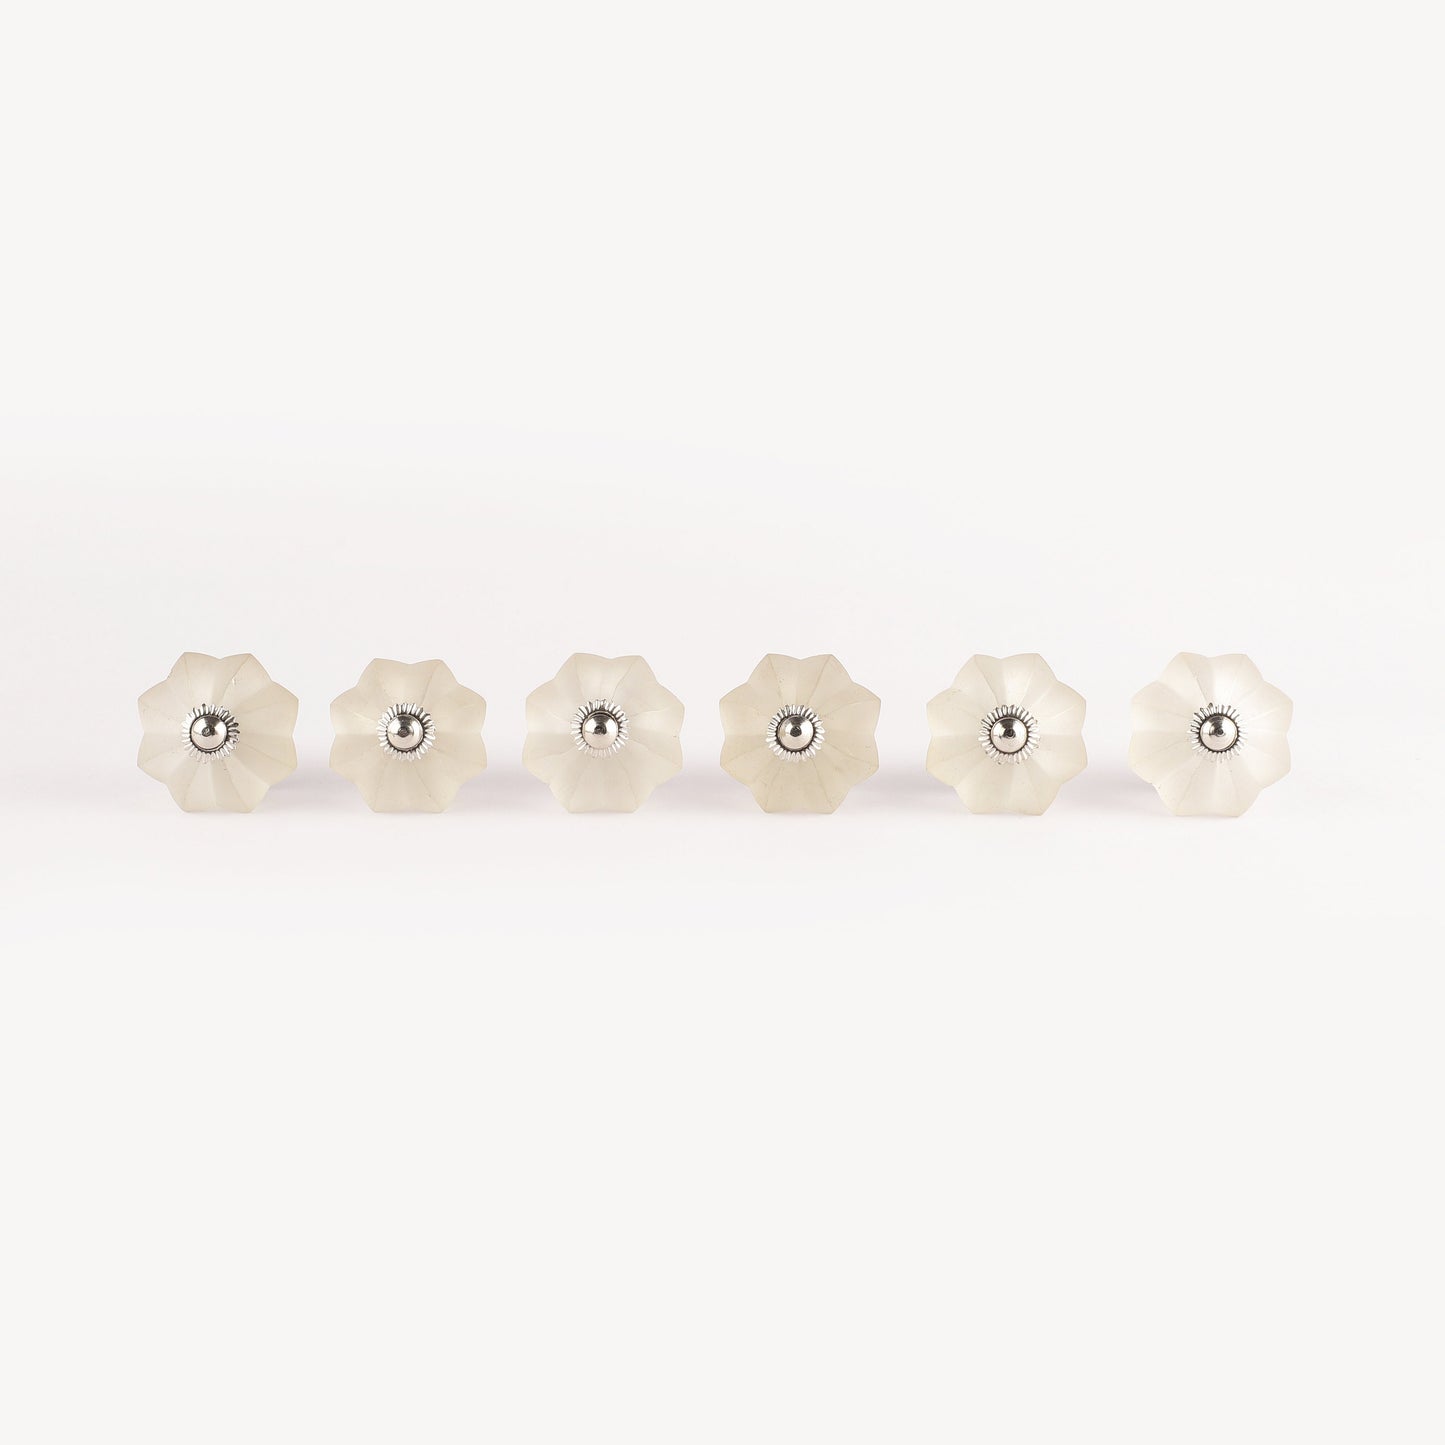 Glass Pull knobs (G18)